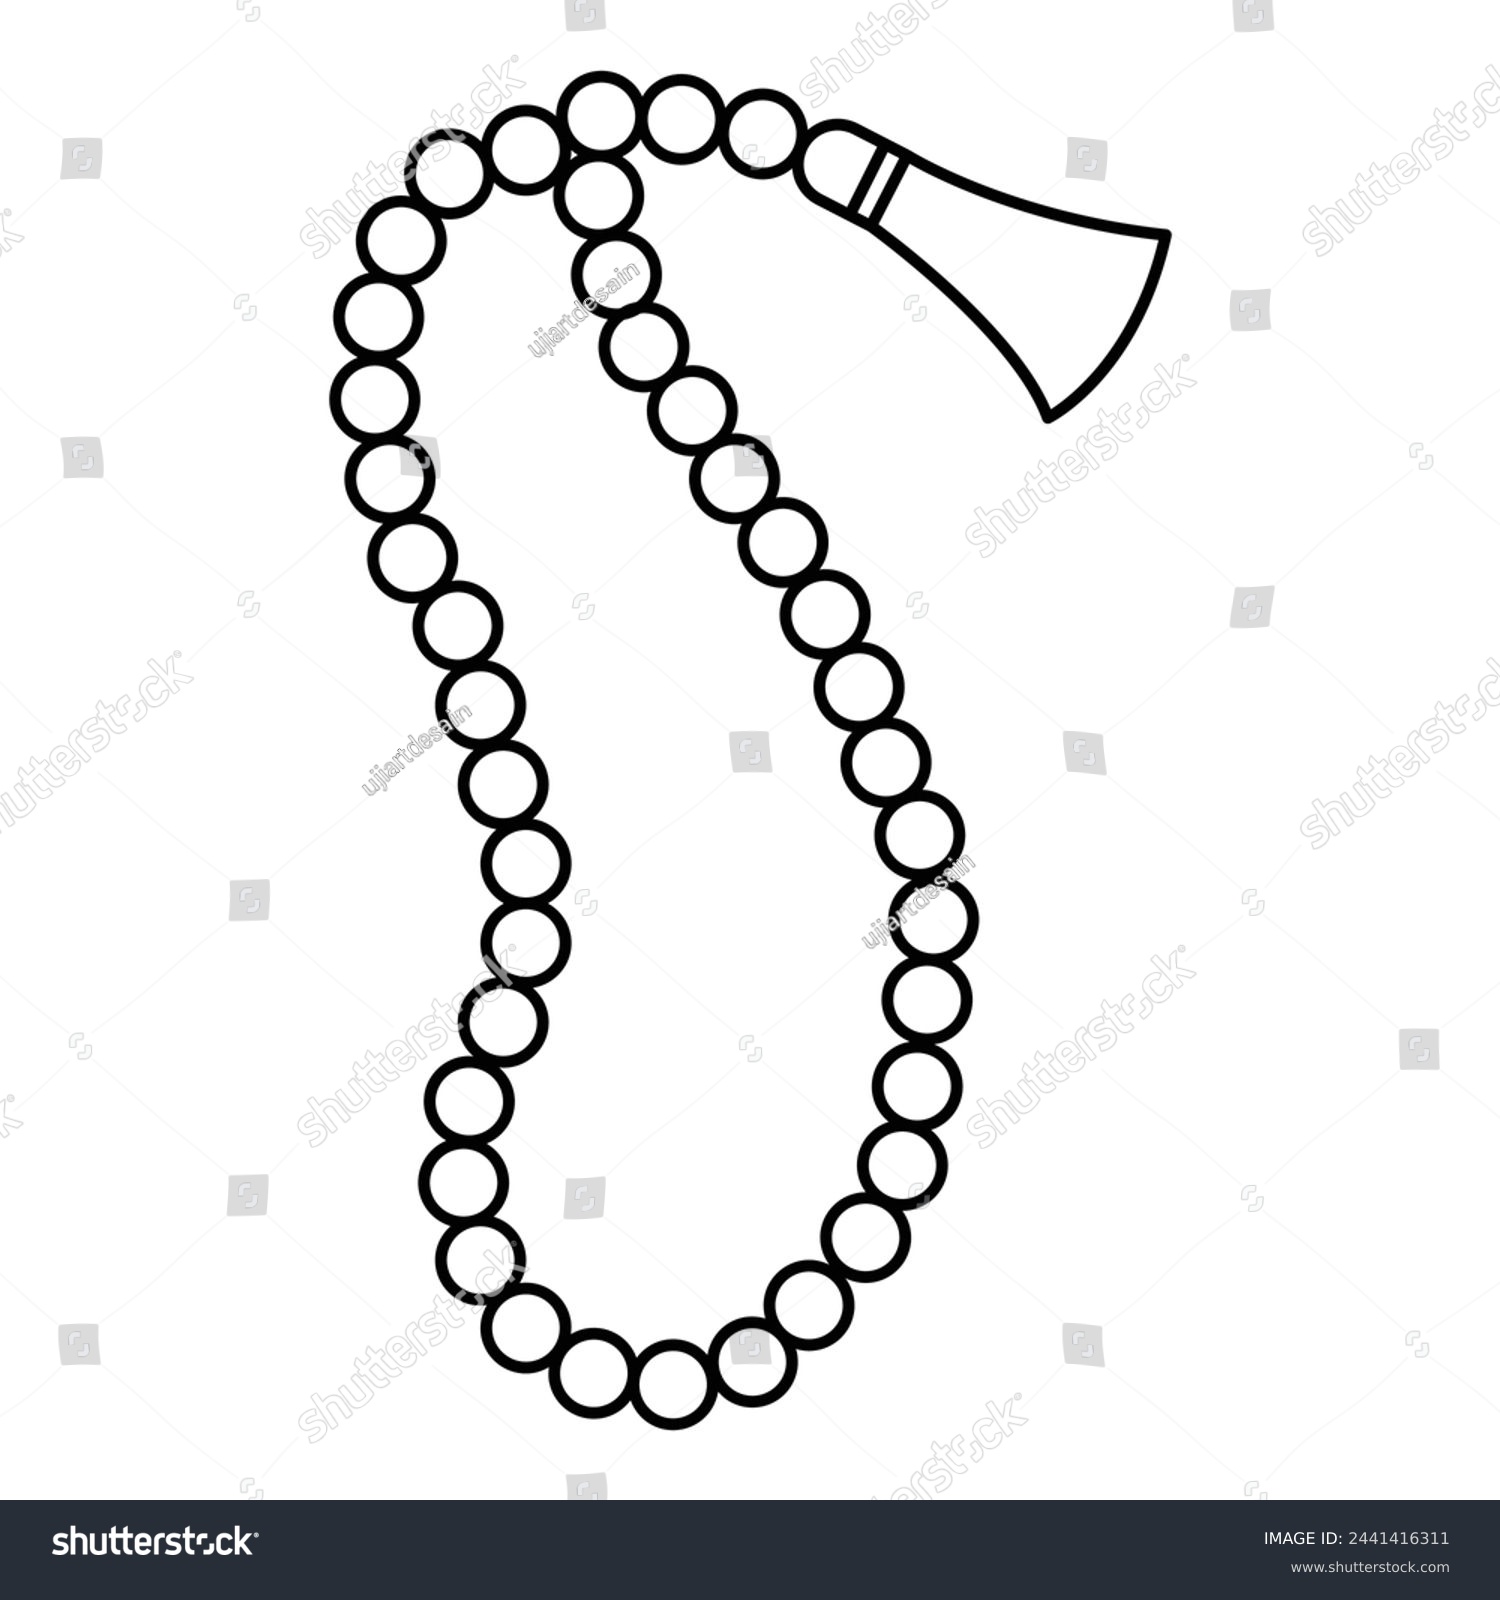 SVG of string of beads used by Muslims to keep track of counting in tasbih svg